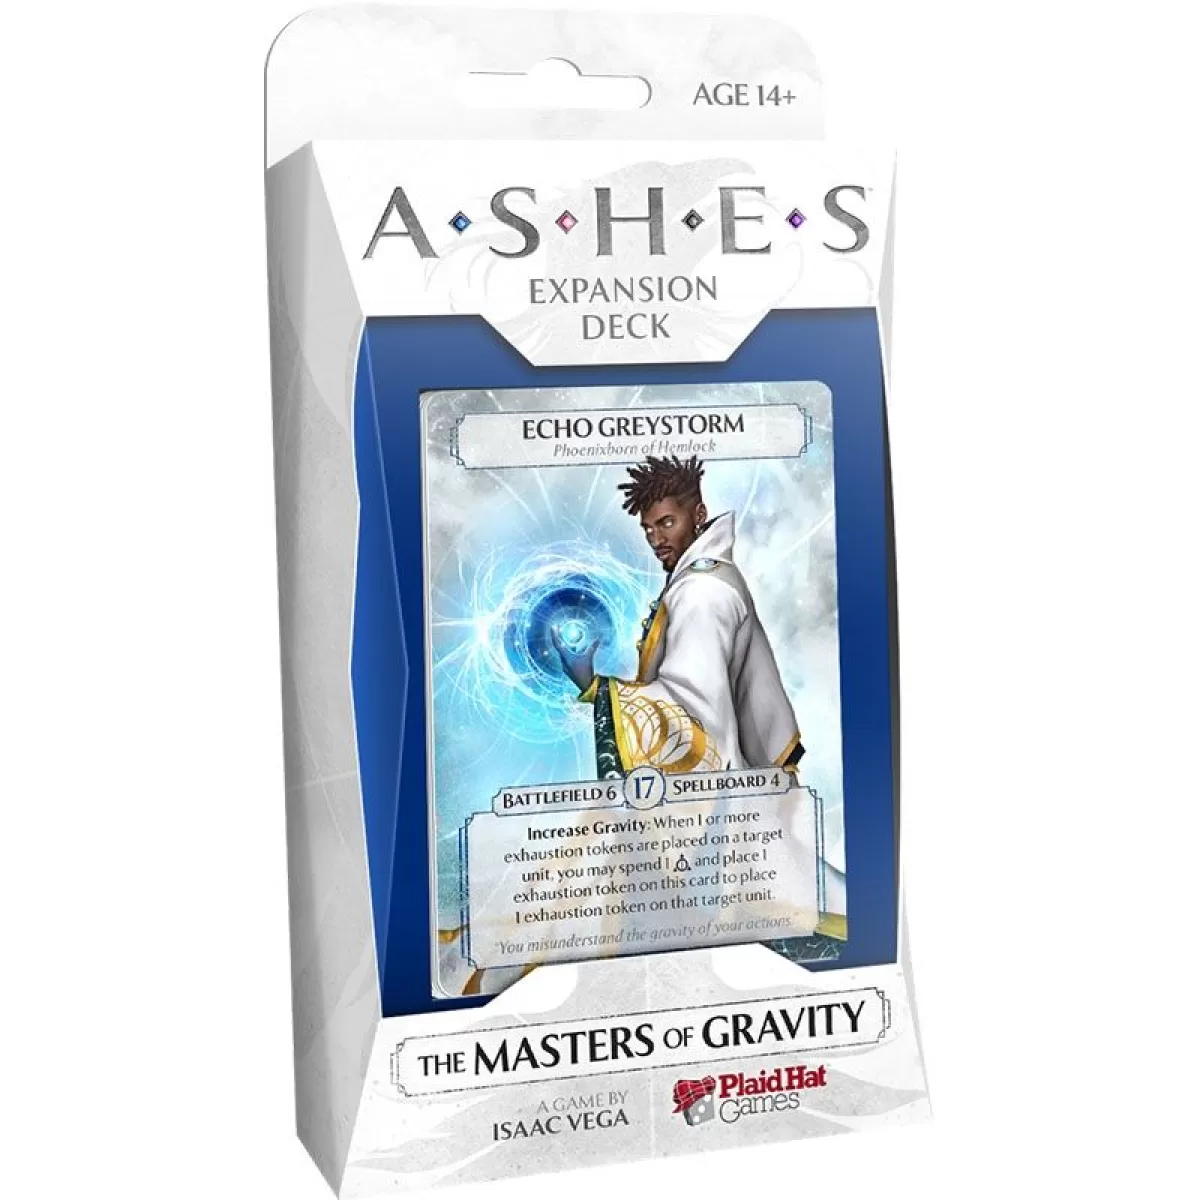 Ashes: The masters of gravity